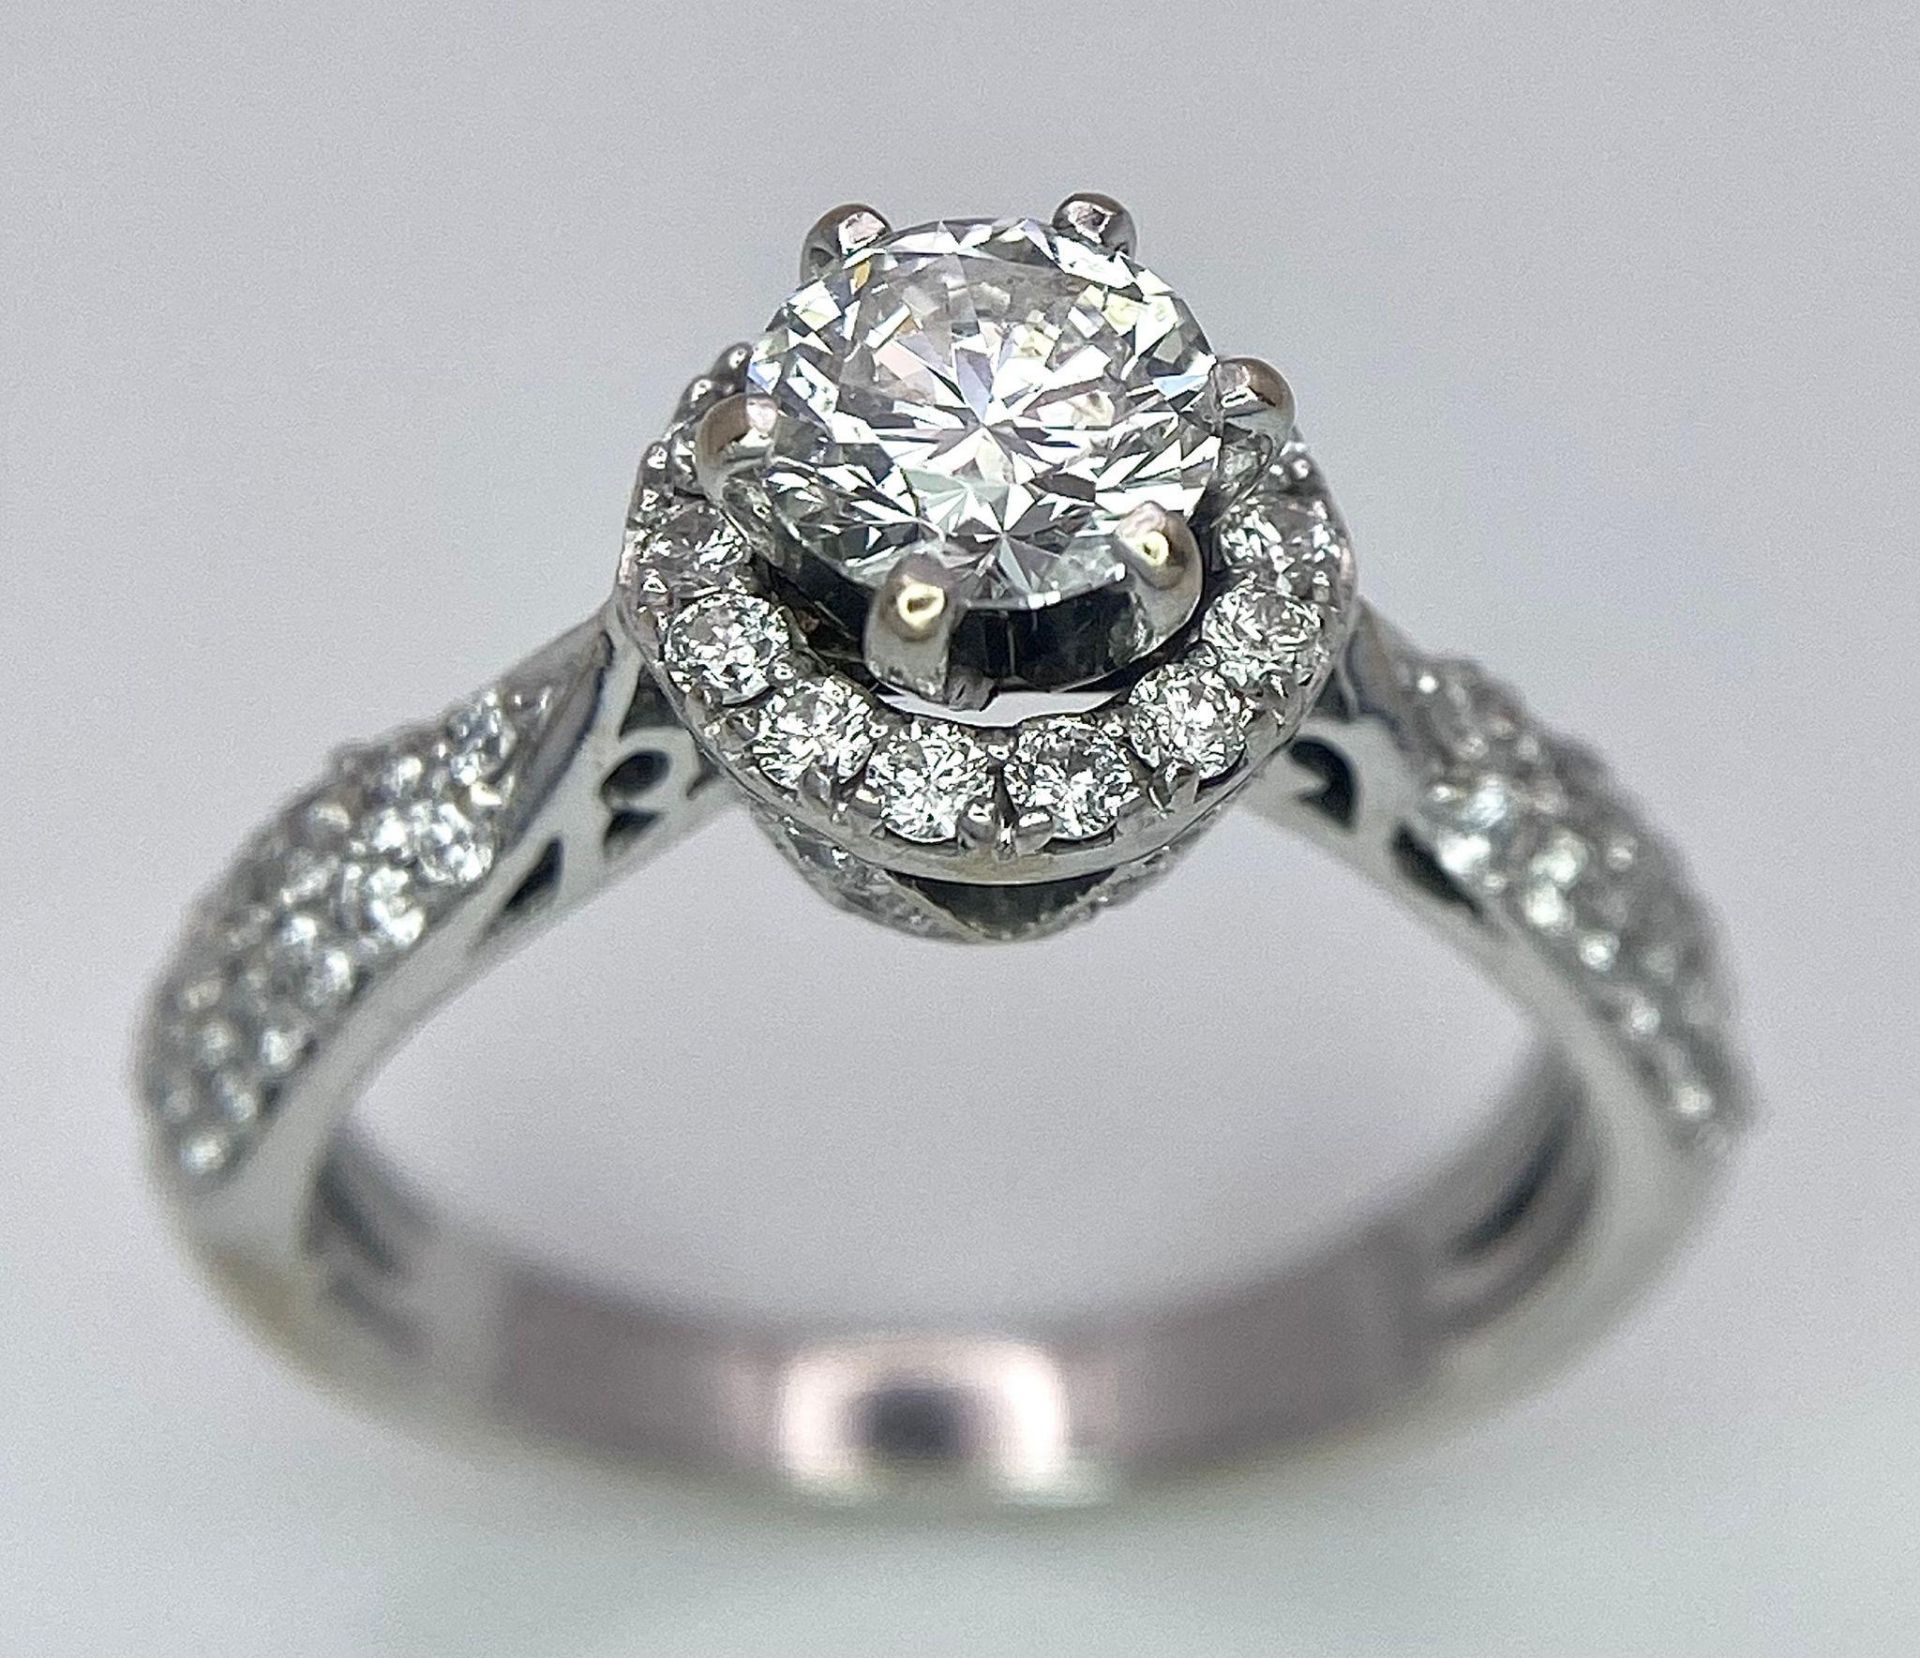 An 18K White Gold Diamond Ring. Central 0.75ct brilliant round cut diamond with a diamond halo and